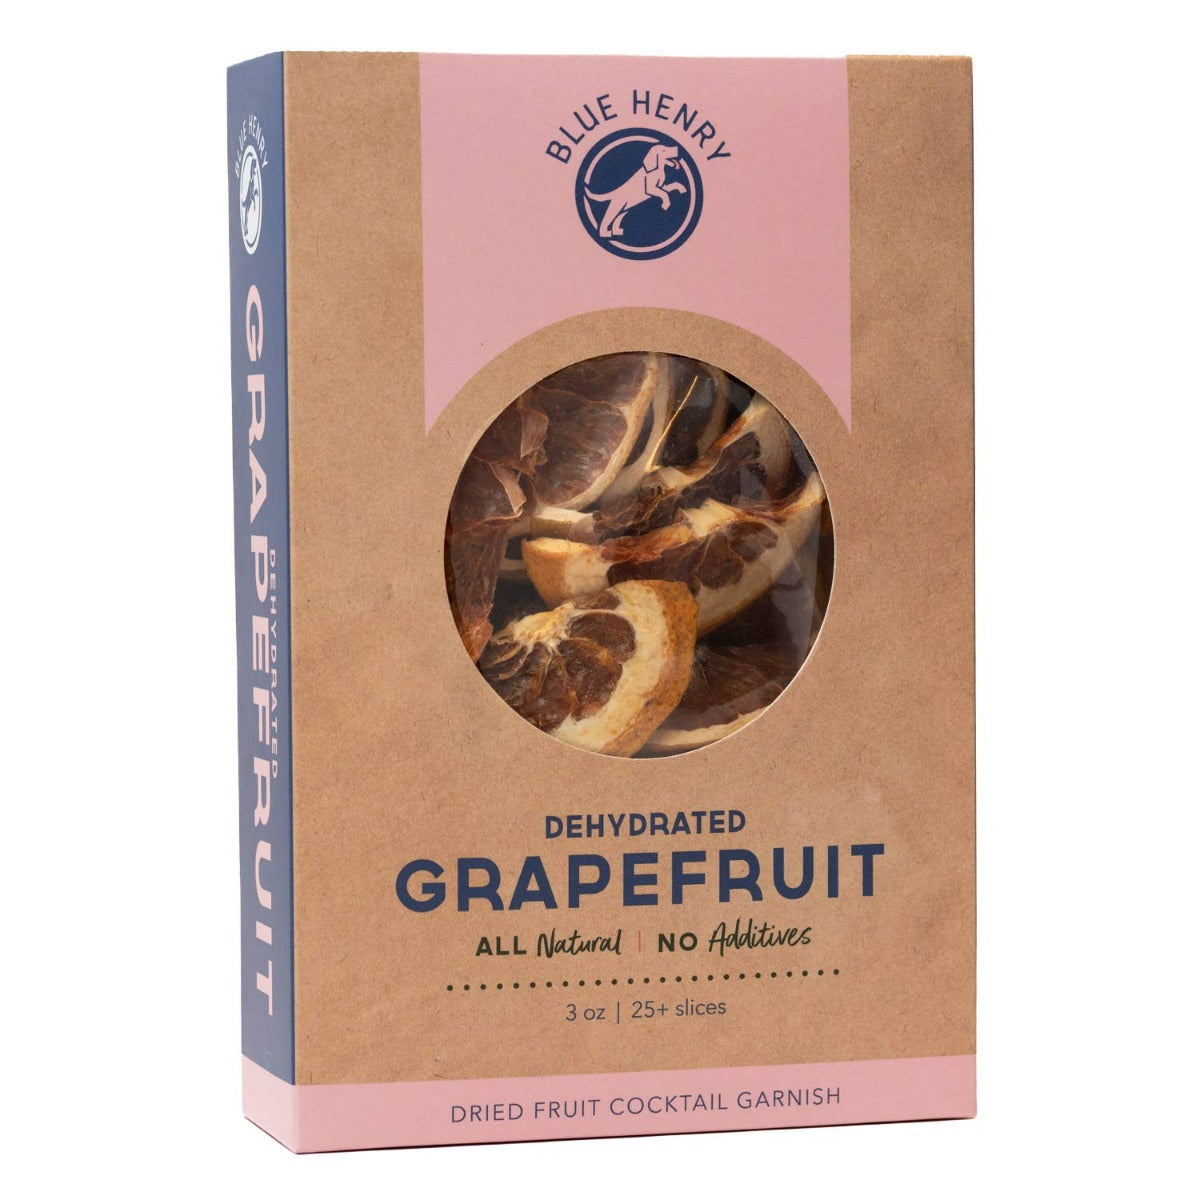 Grapefruit Dehydrated Half Slices- Perfect for desserts or mocktails